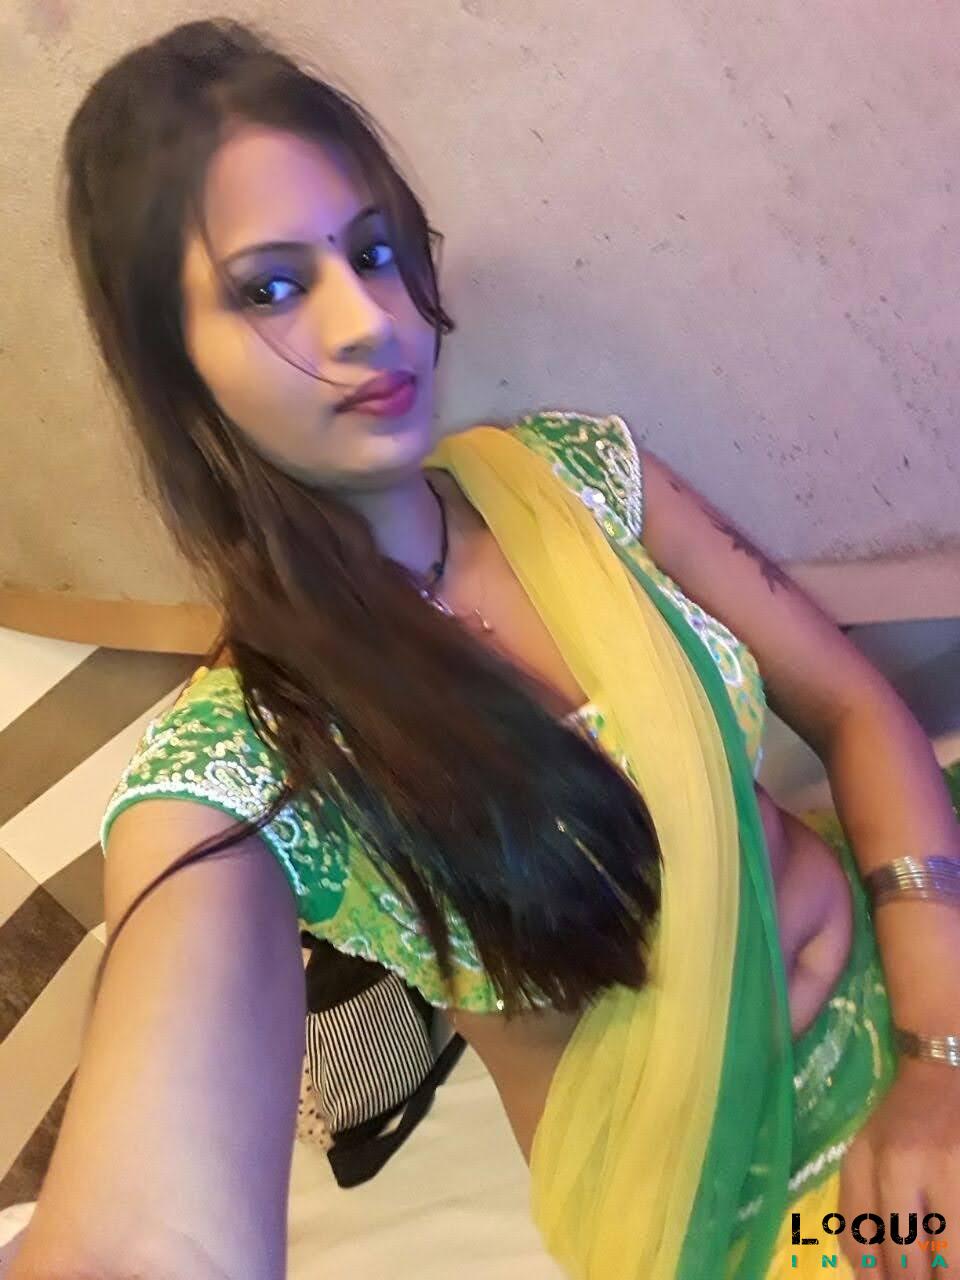 Call Girls West Bengal: Dankuni Call ma❤️93341*57647❤️Low price call girl 100% TRUSTED independ